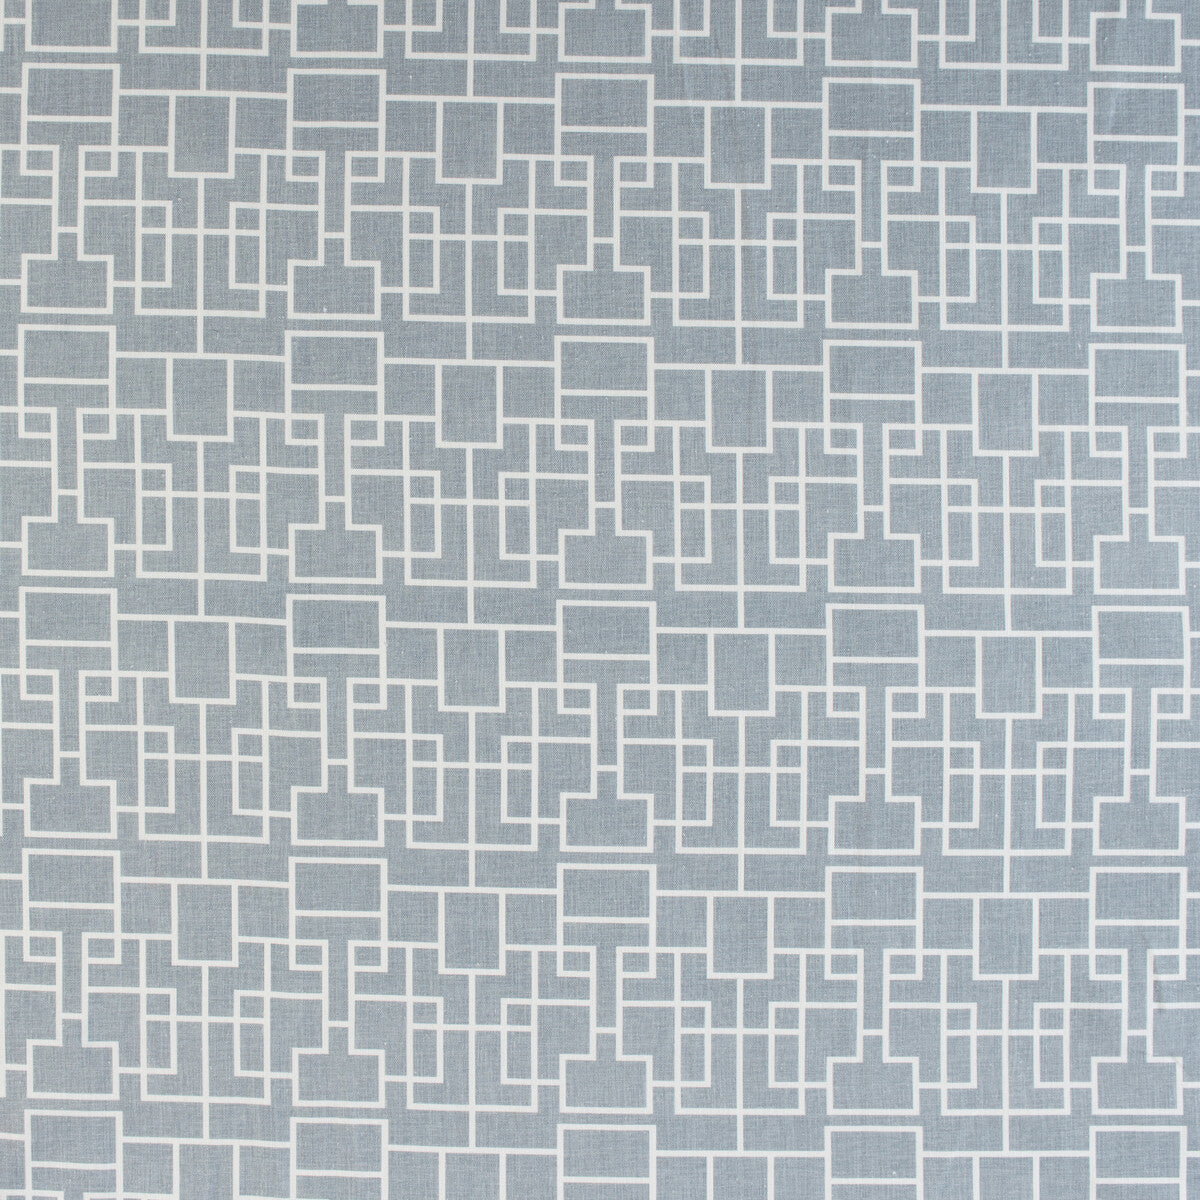 Garden Key fabric in heron color - pattern GARDEN KEY.5.0 - by Kravet Design in the Barbara Barry Home Midsummer collection